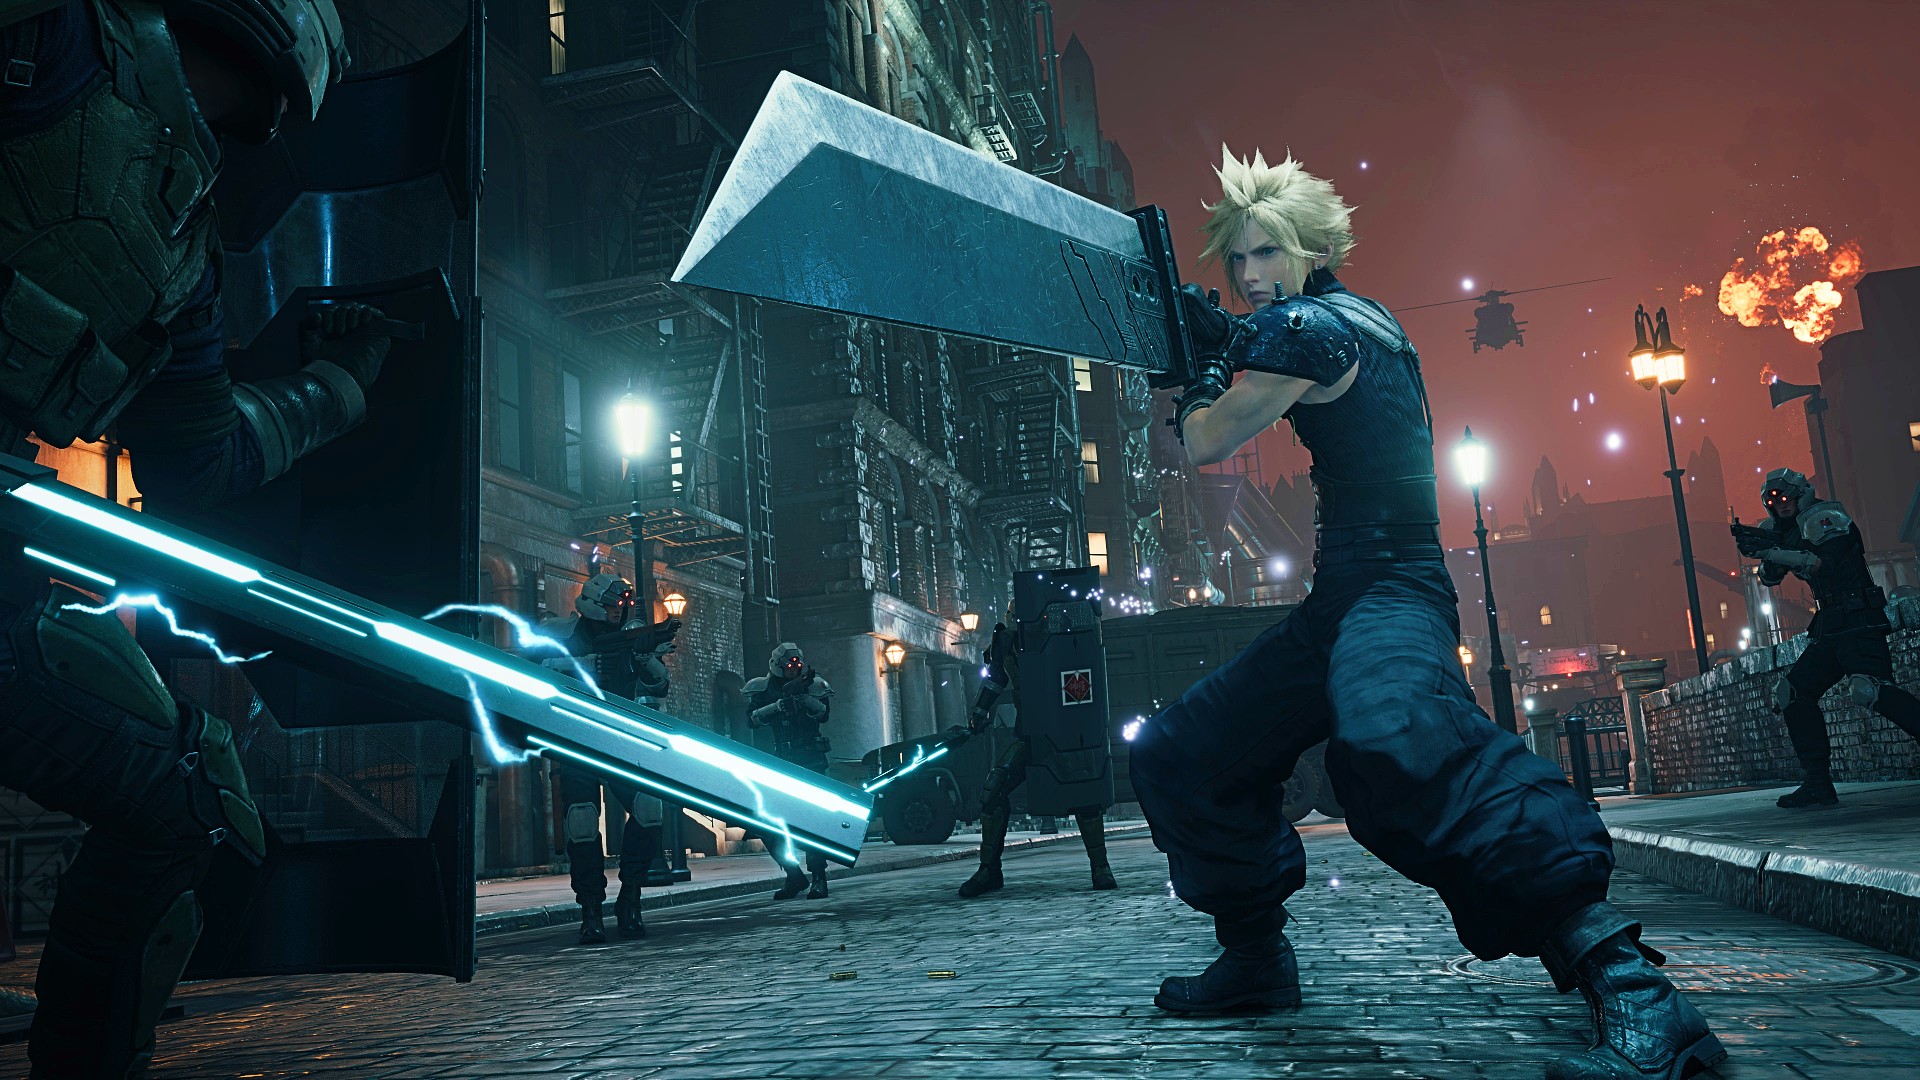 Here’s Final Fantasy 7: Remake with a classic, PS1-style camera